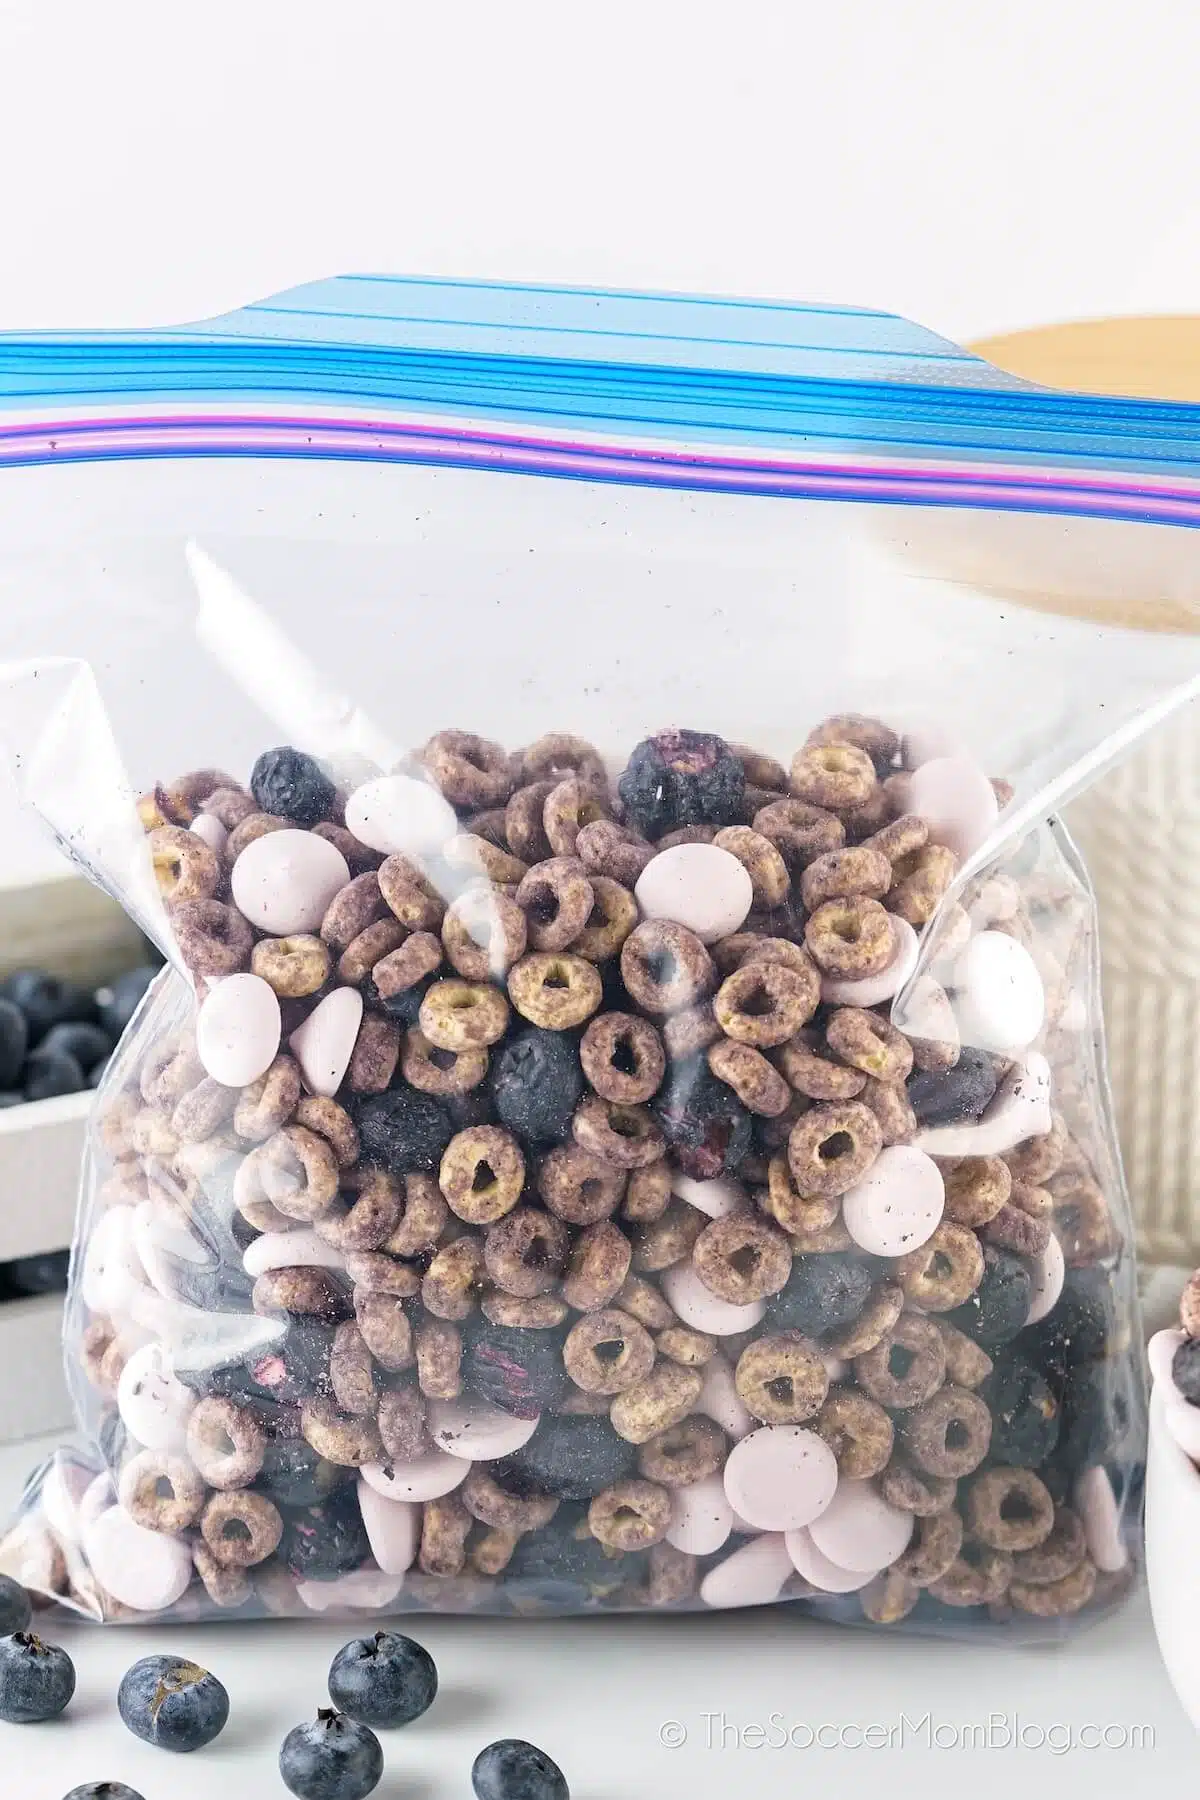 A plastic zip-lock bag is filled with multicolored cereal and fresh blueberries, additional blueberries are scattered around against a blurred background.